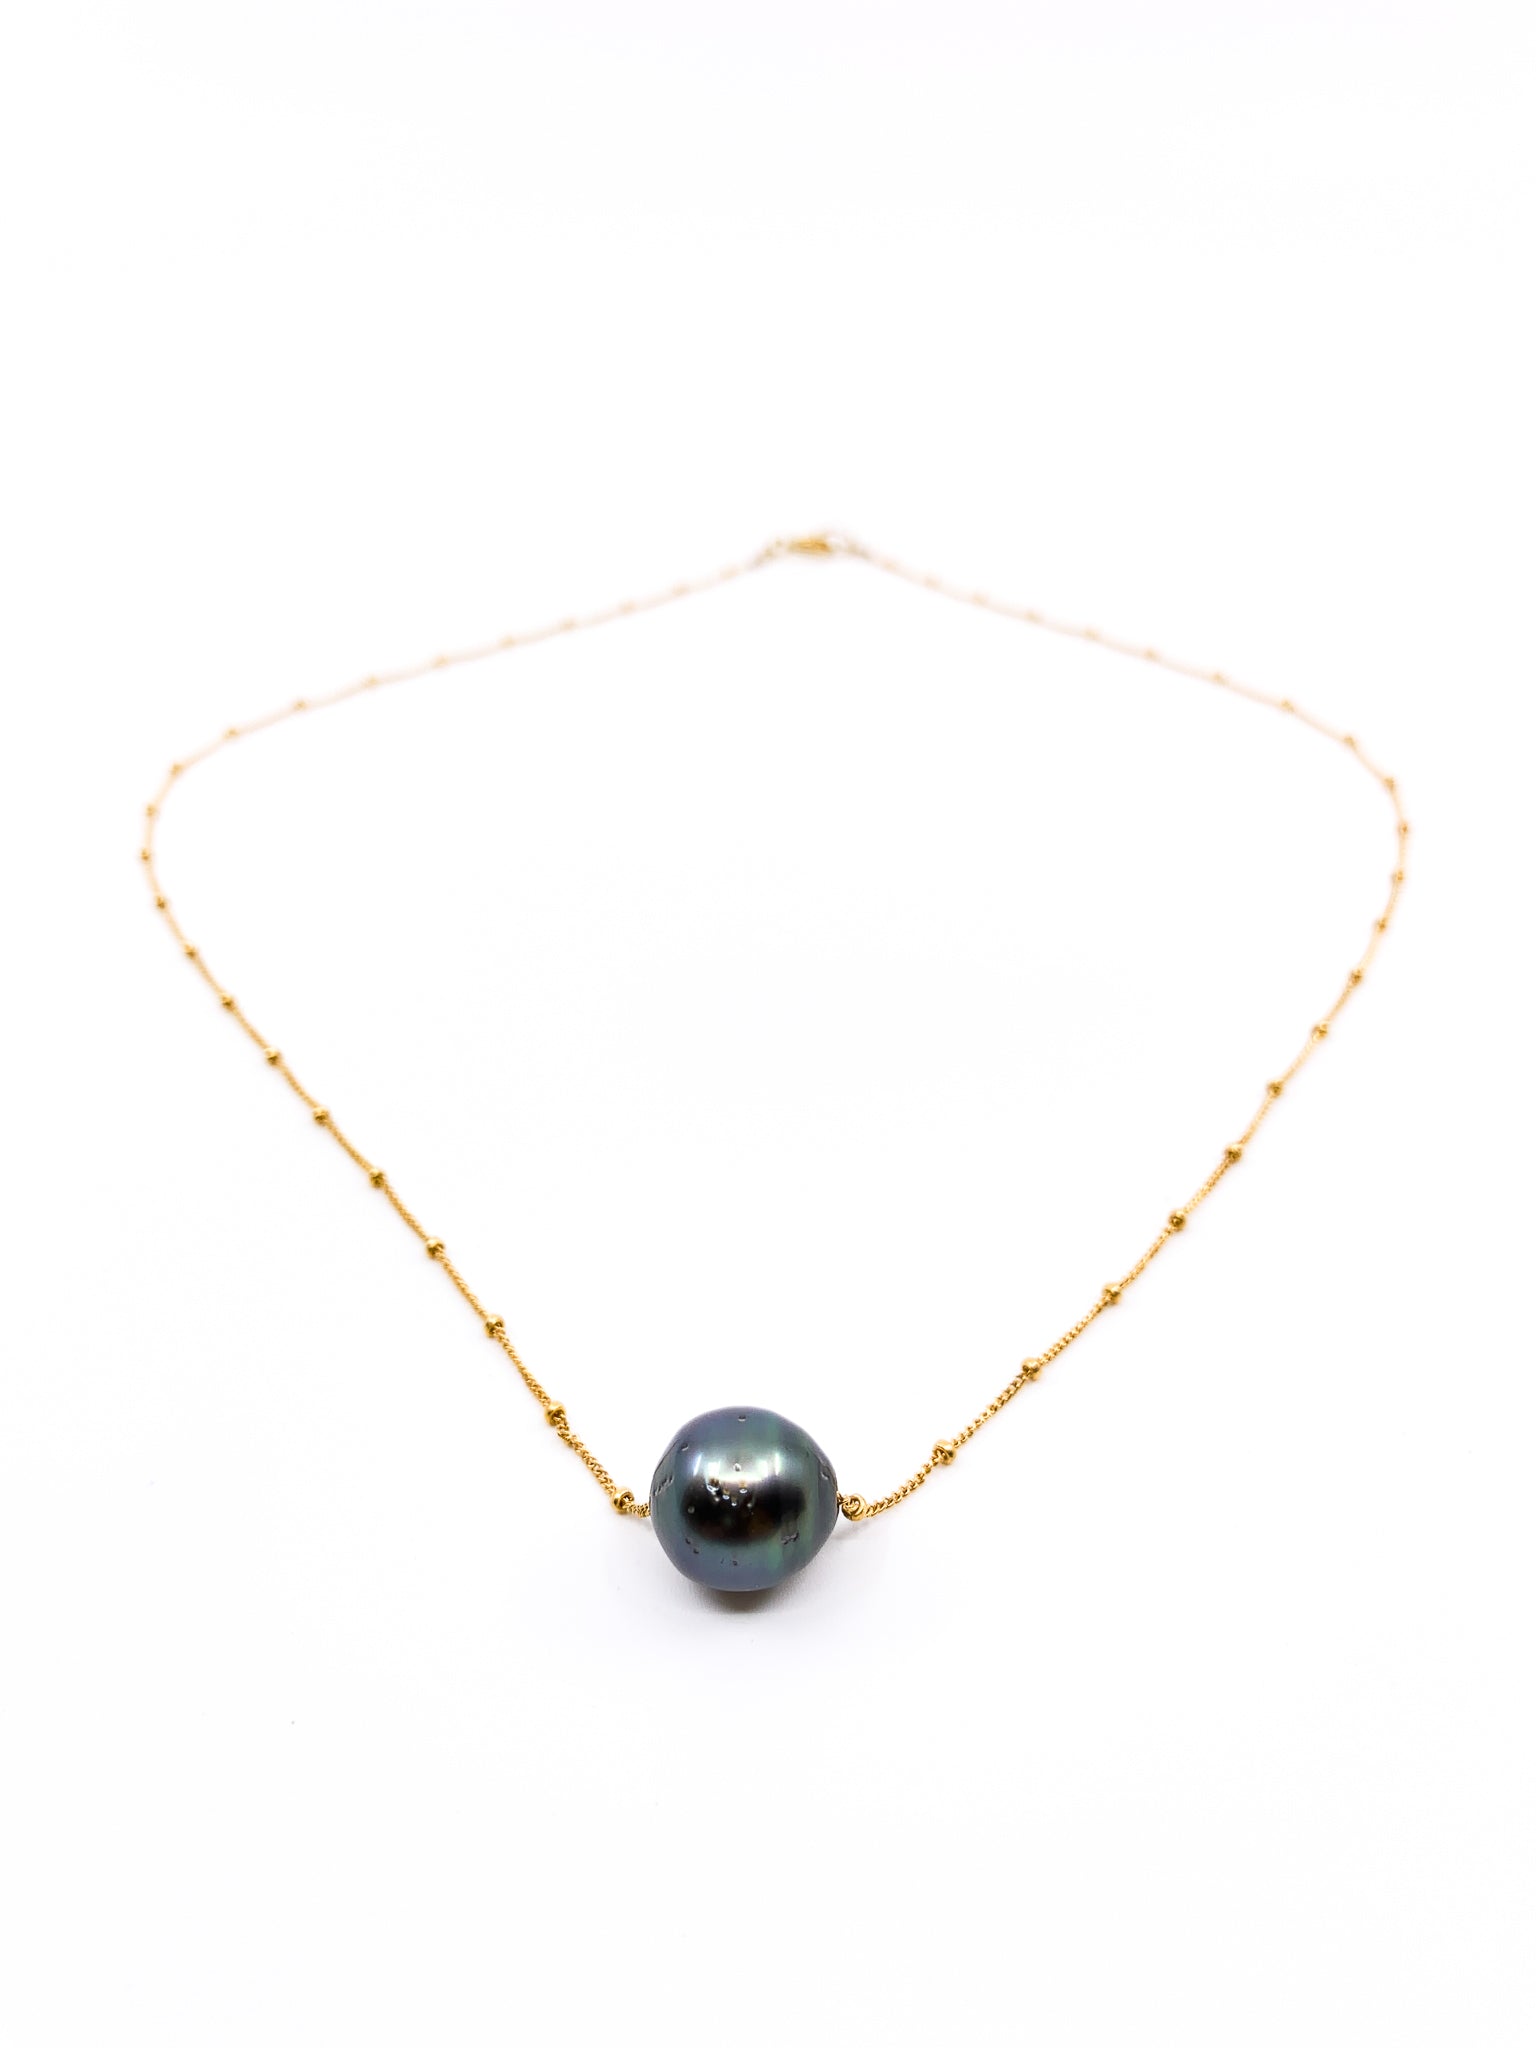 tahitian pearl delicate gold chain necklace by eve black jewelry made in Hawaii